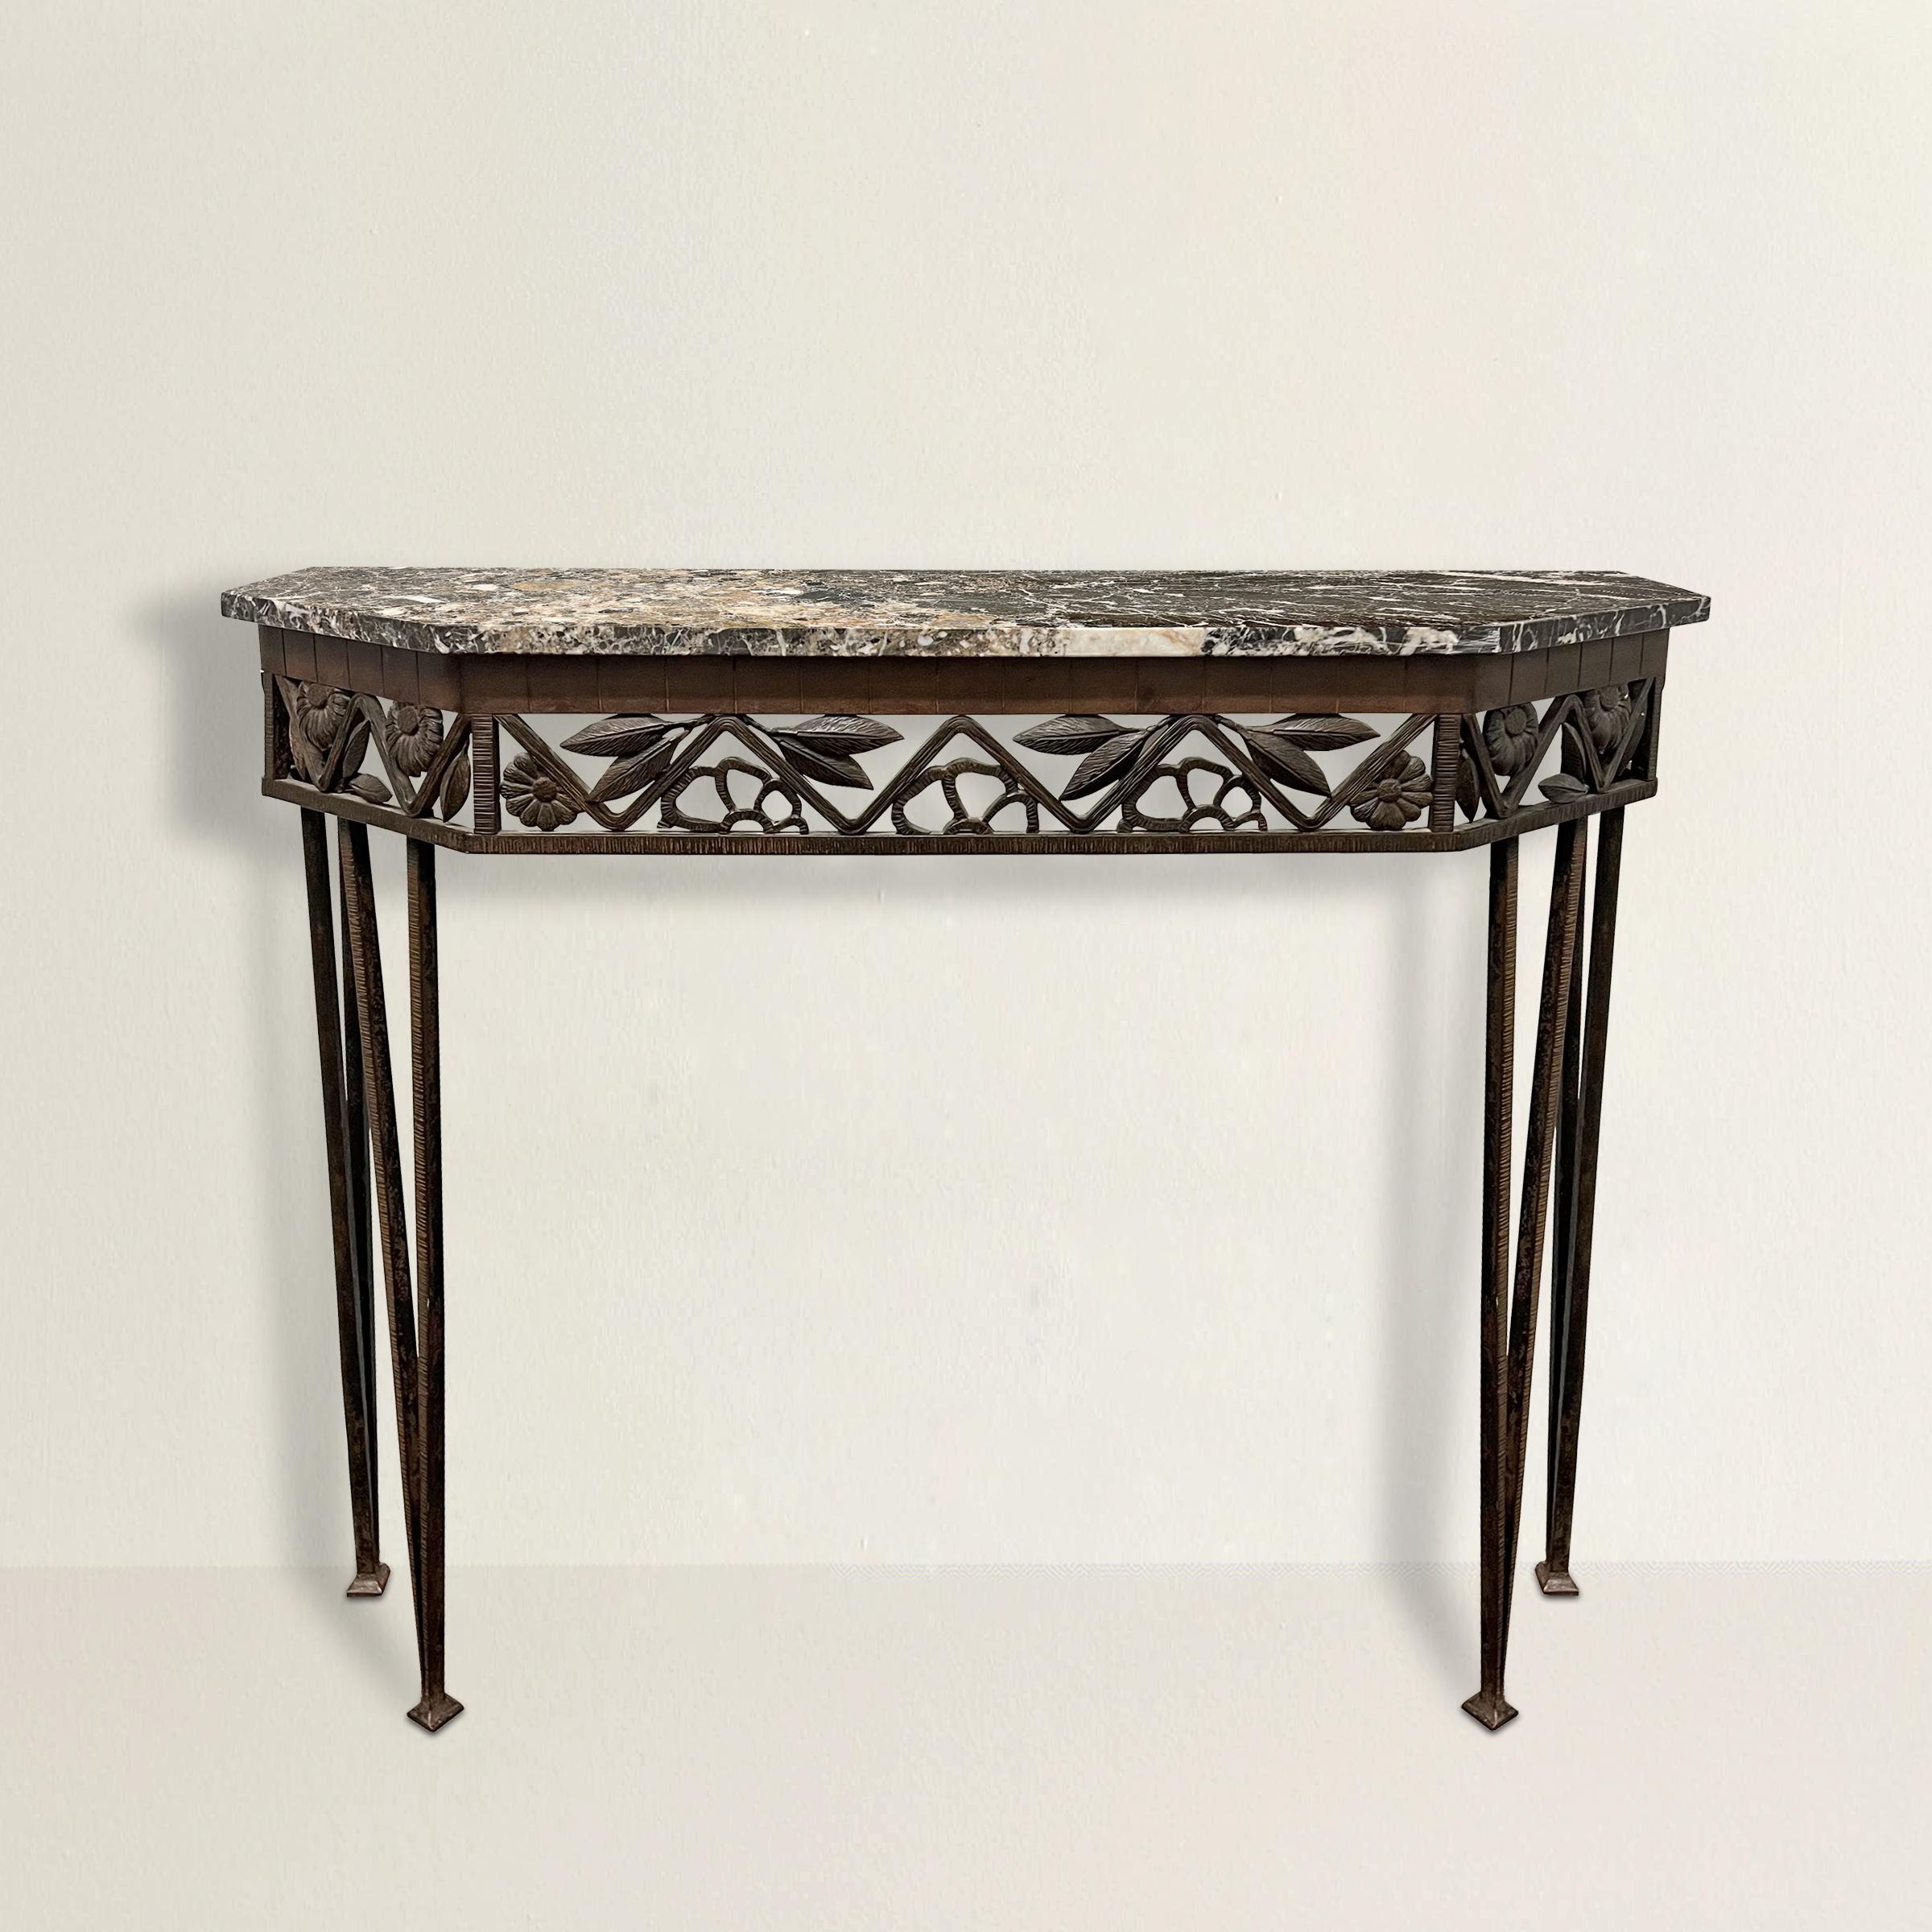 A stunning early 20th century French Art Deco Fer Forgé console table with a hand-wrought iron base with flowers and leaves, some in relief and some in profile, tapered legs, and a polished marble top.  The perfect table for your foyer, or hallway. 